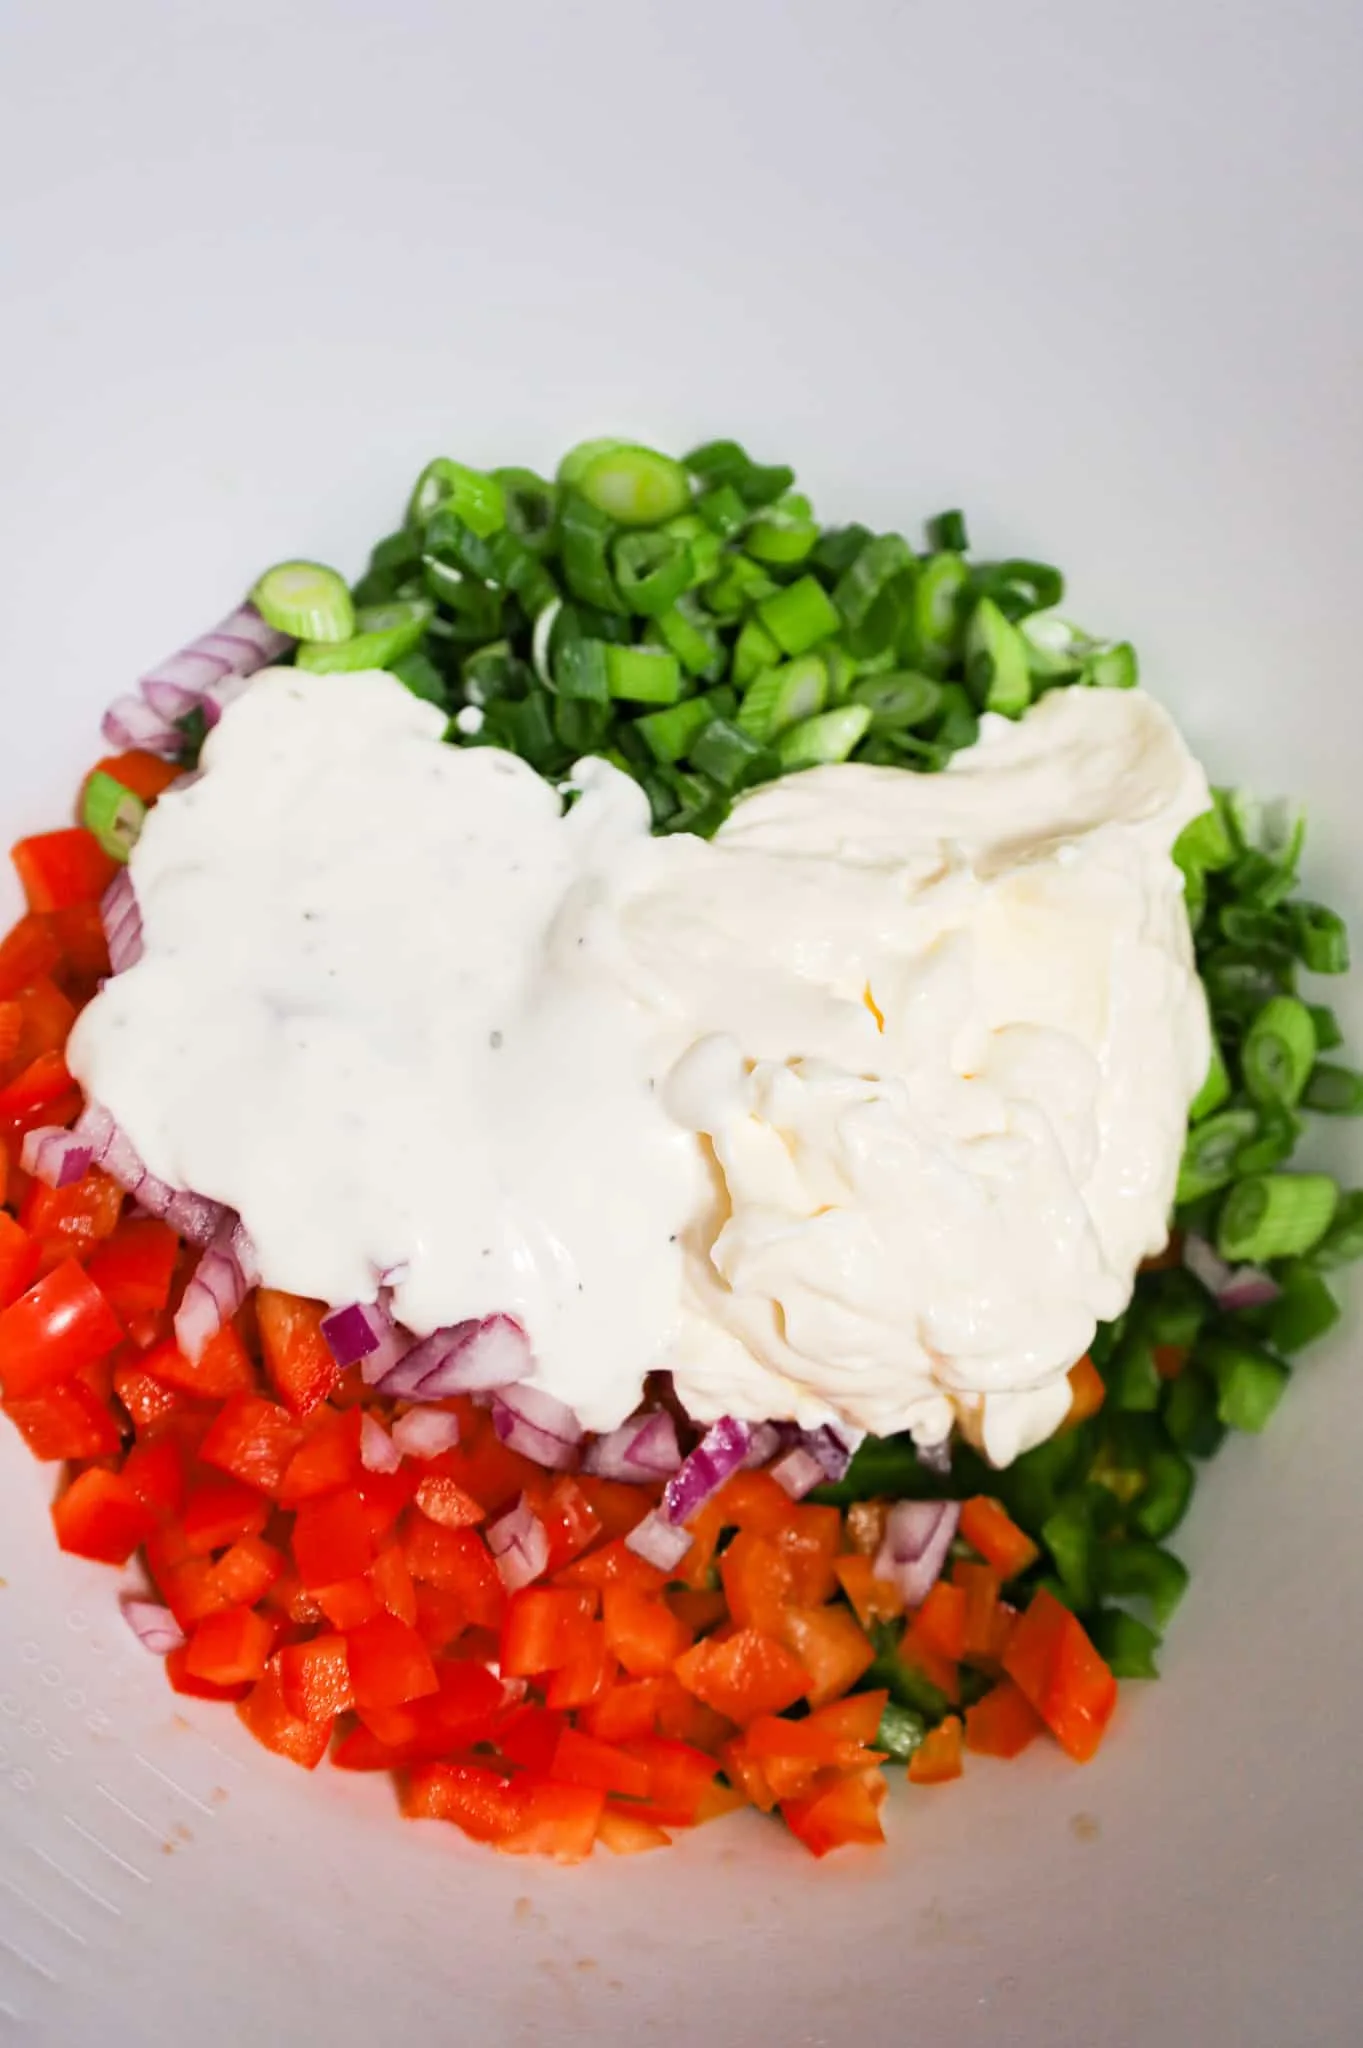 ranch dressing, mayo and diced veggies in a mixing bowl